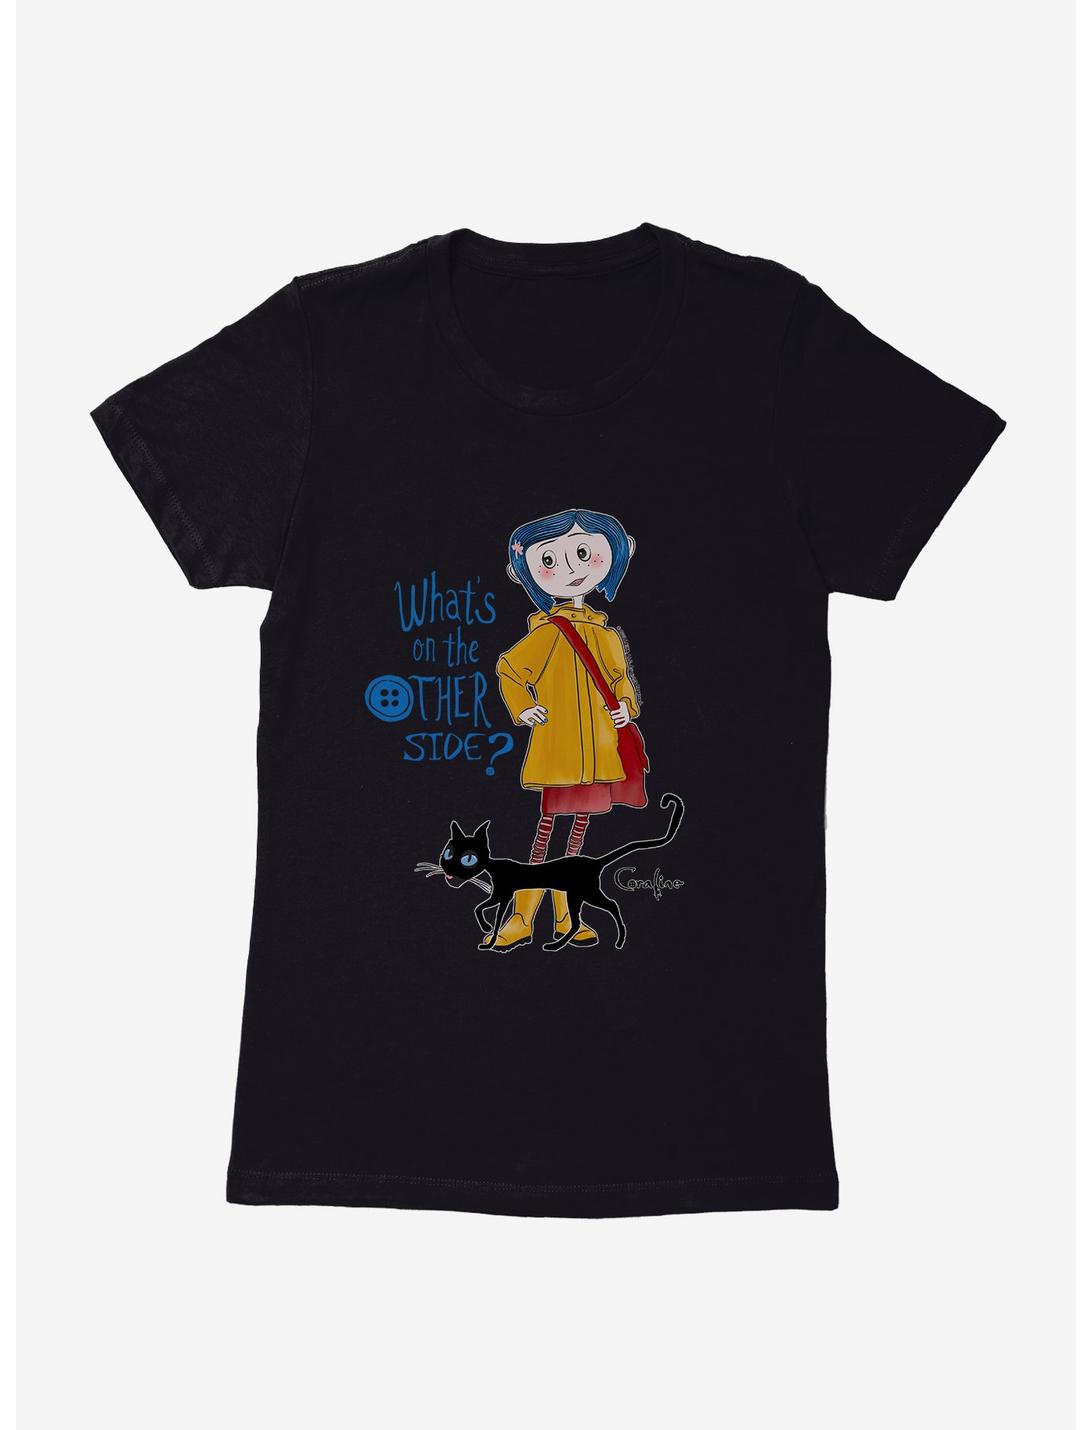 Coraline Other Side Womens T-Shirt, , hi-res